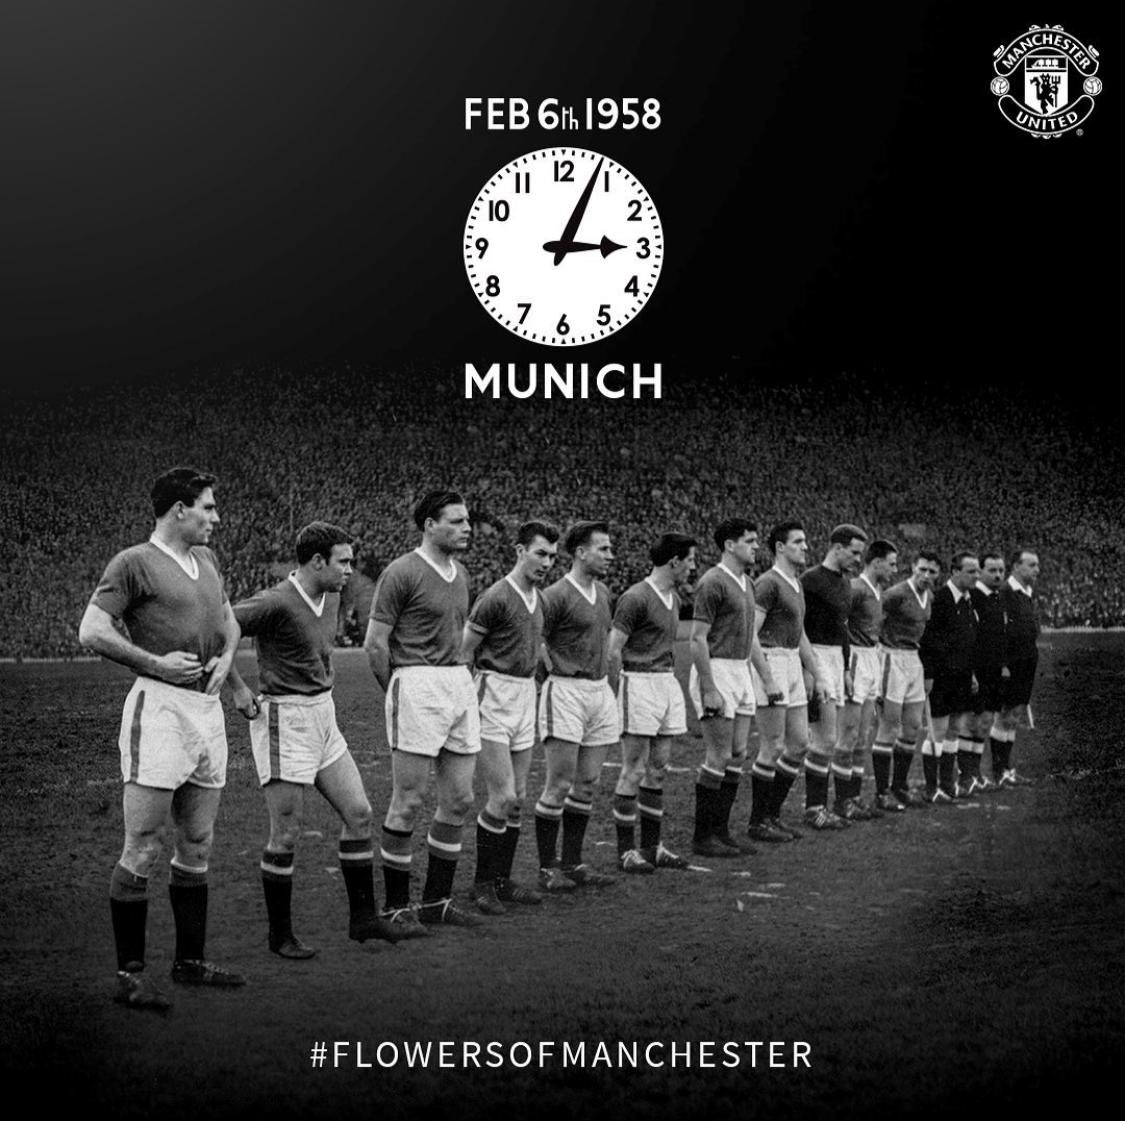 We will remember them always ❤️ #FlowersOfManchester